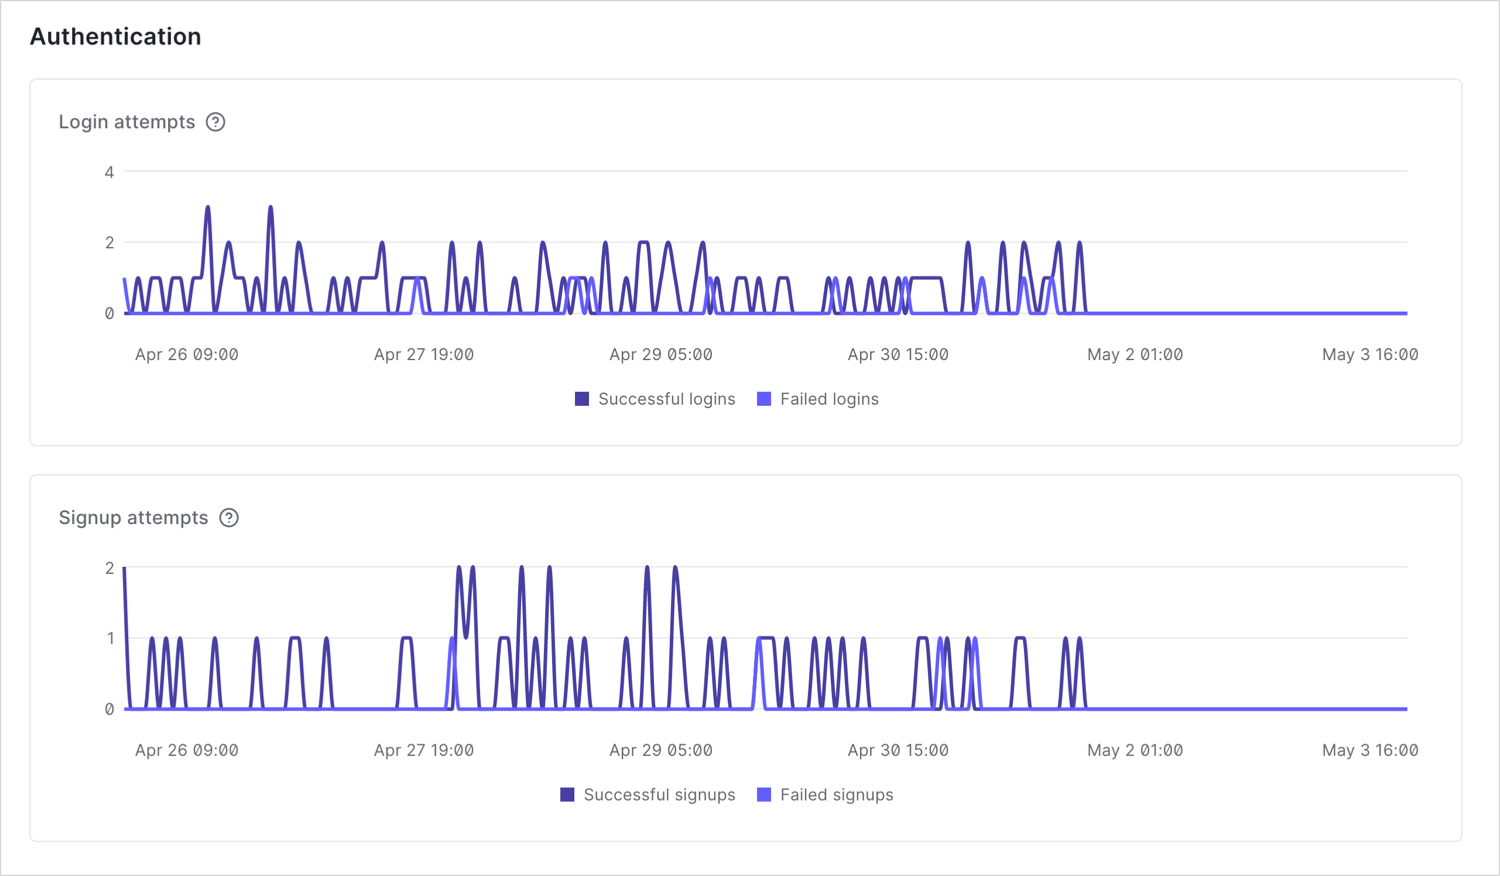 Screenshot shows two line graphs. One shows the number of login attempts in the last 7 days. Separate lines are shown for successful logins and failed logins. The other shows the number of signup attempts over the last 7 days. Separate lines are shown for successful signups and failed signups.